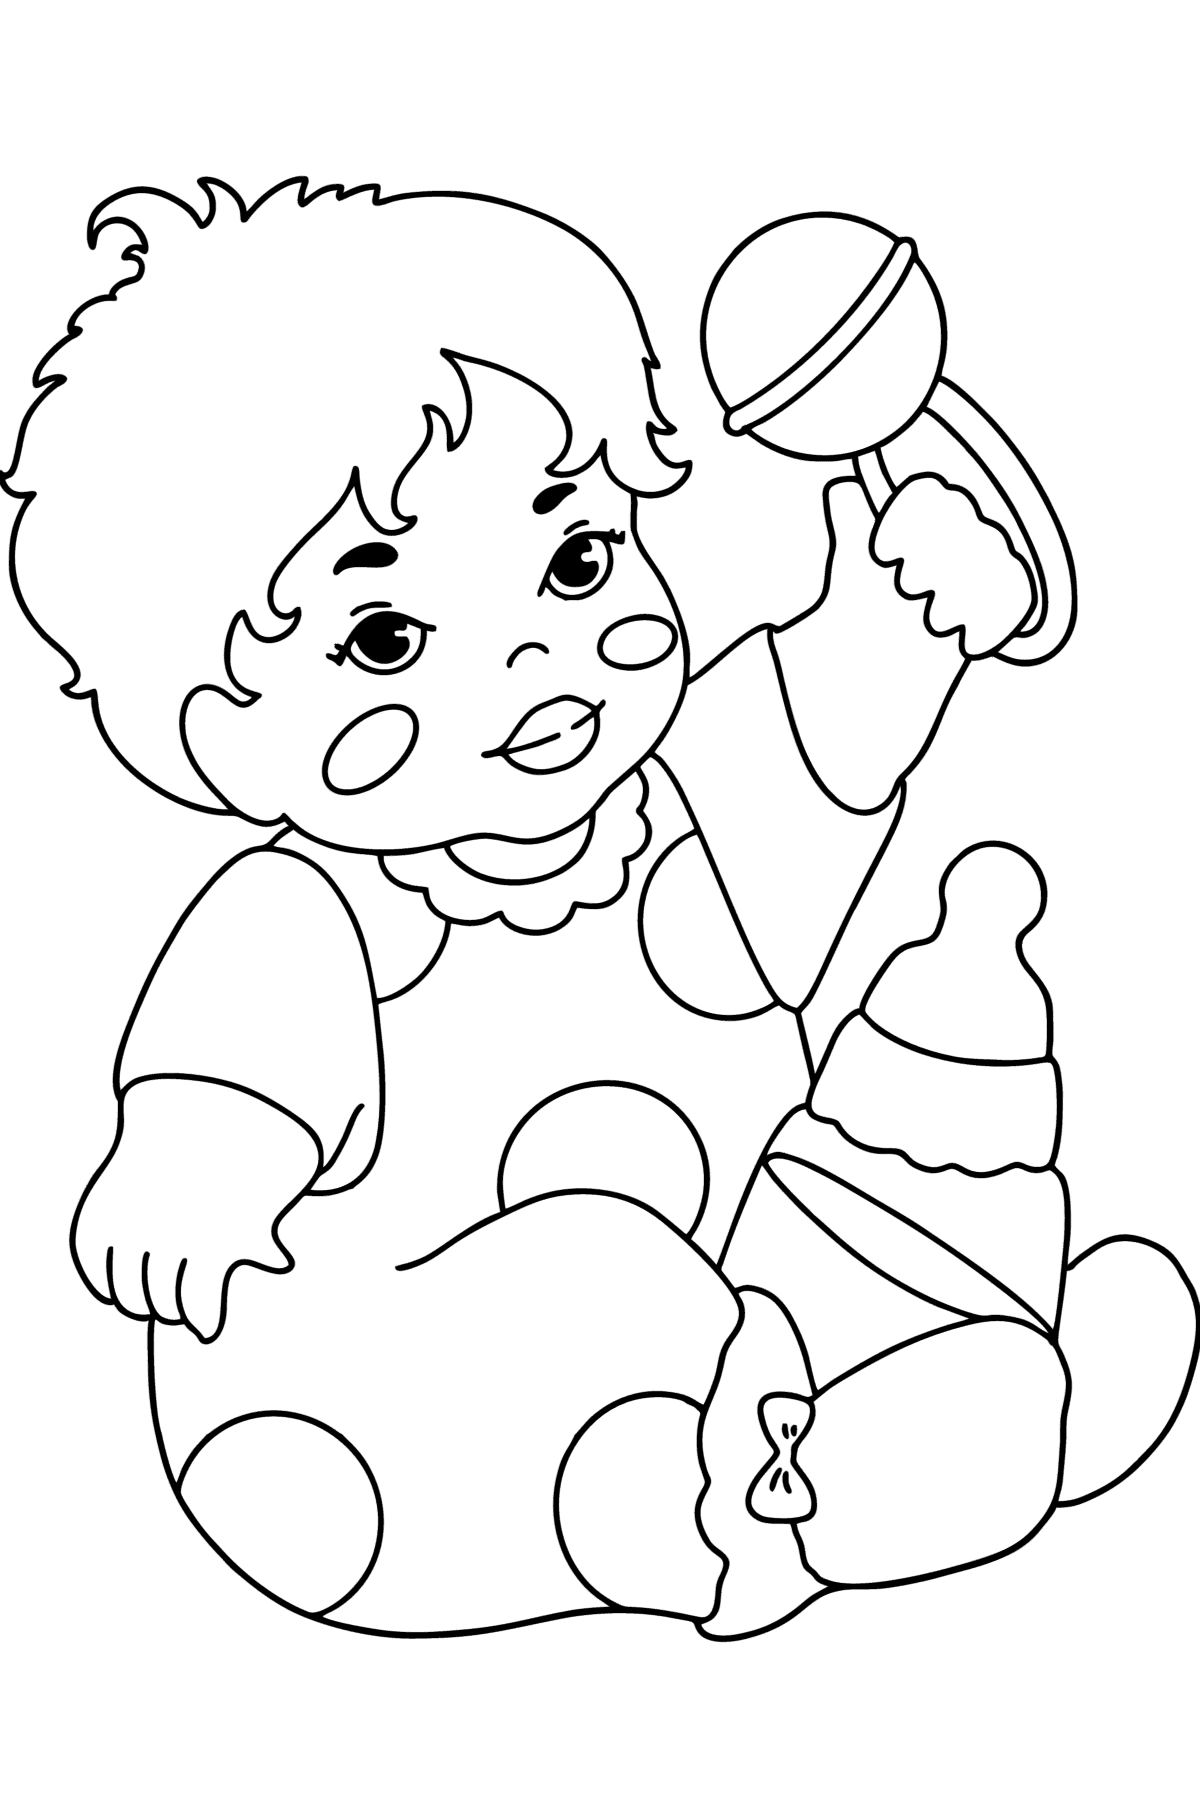 Baby with a rattle сoloring page - Coloring Pages for Kids